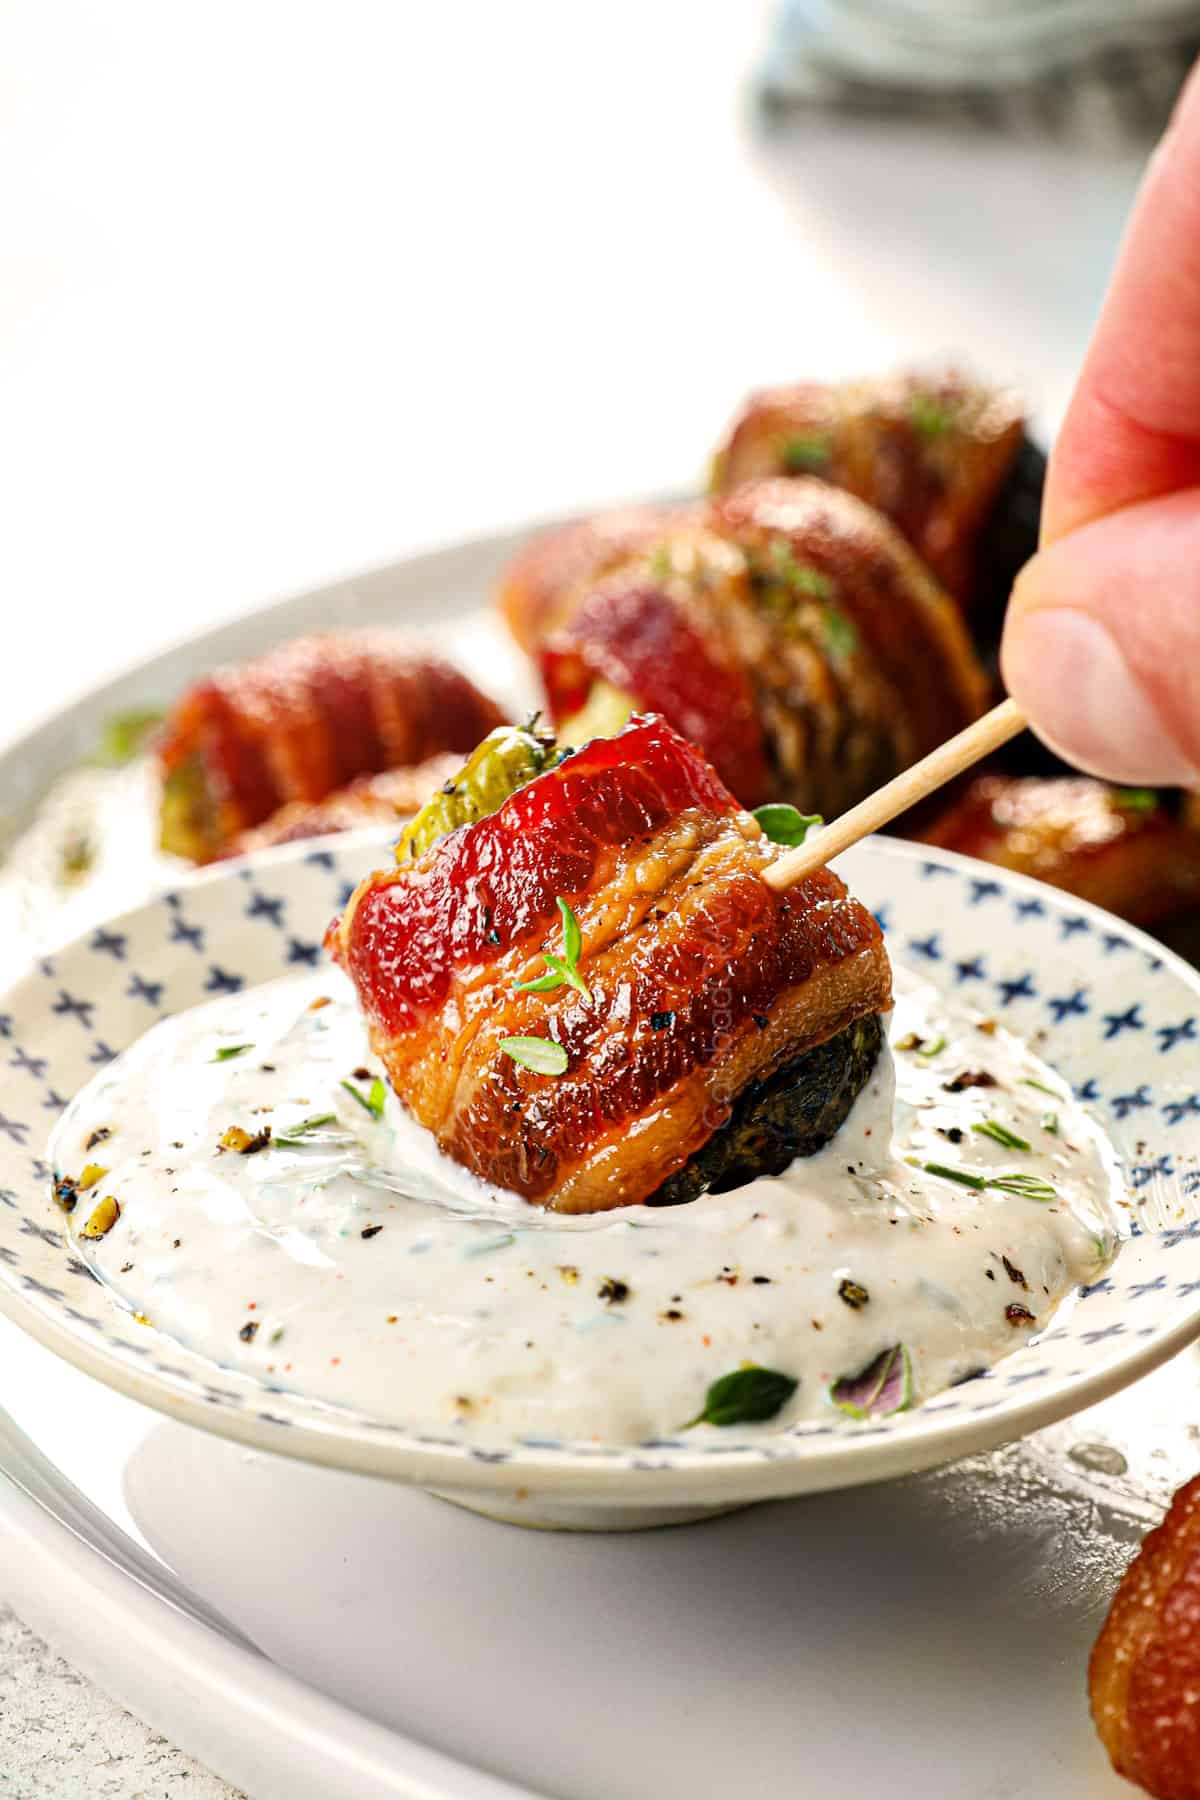 showing how to serve Bacon Wrapped Brussels Sprouts by dipping sprouts in Horseradish Sauce